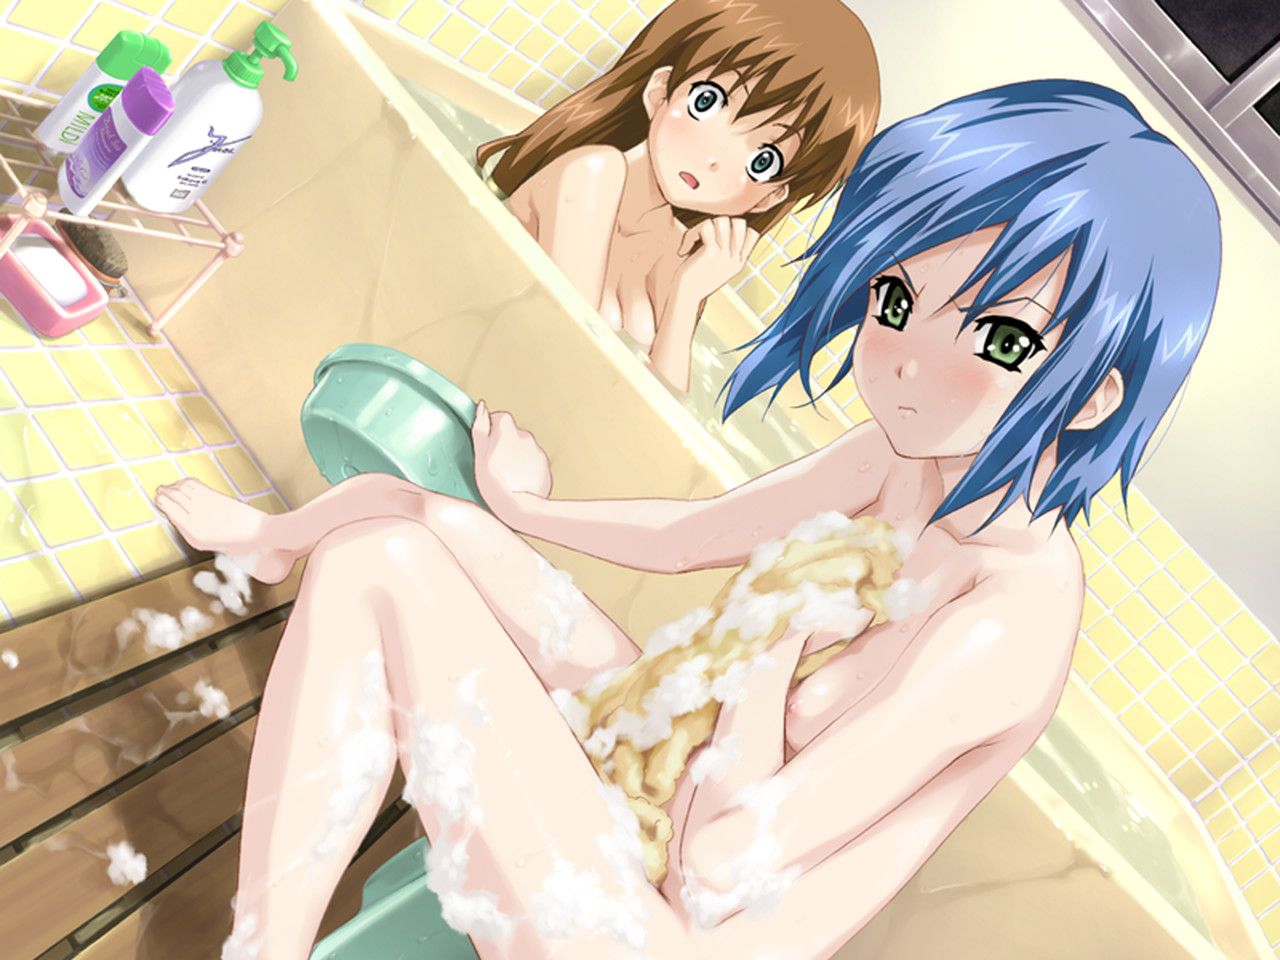 Bath image that I want to do lewd thing covered with foam 4